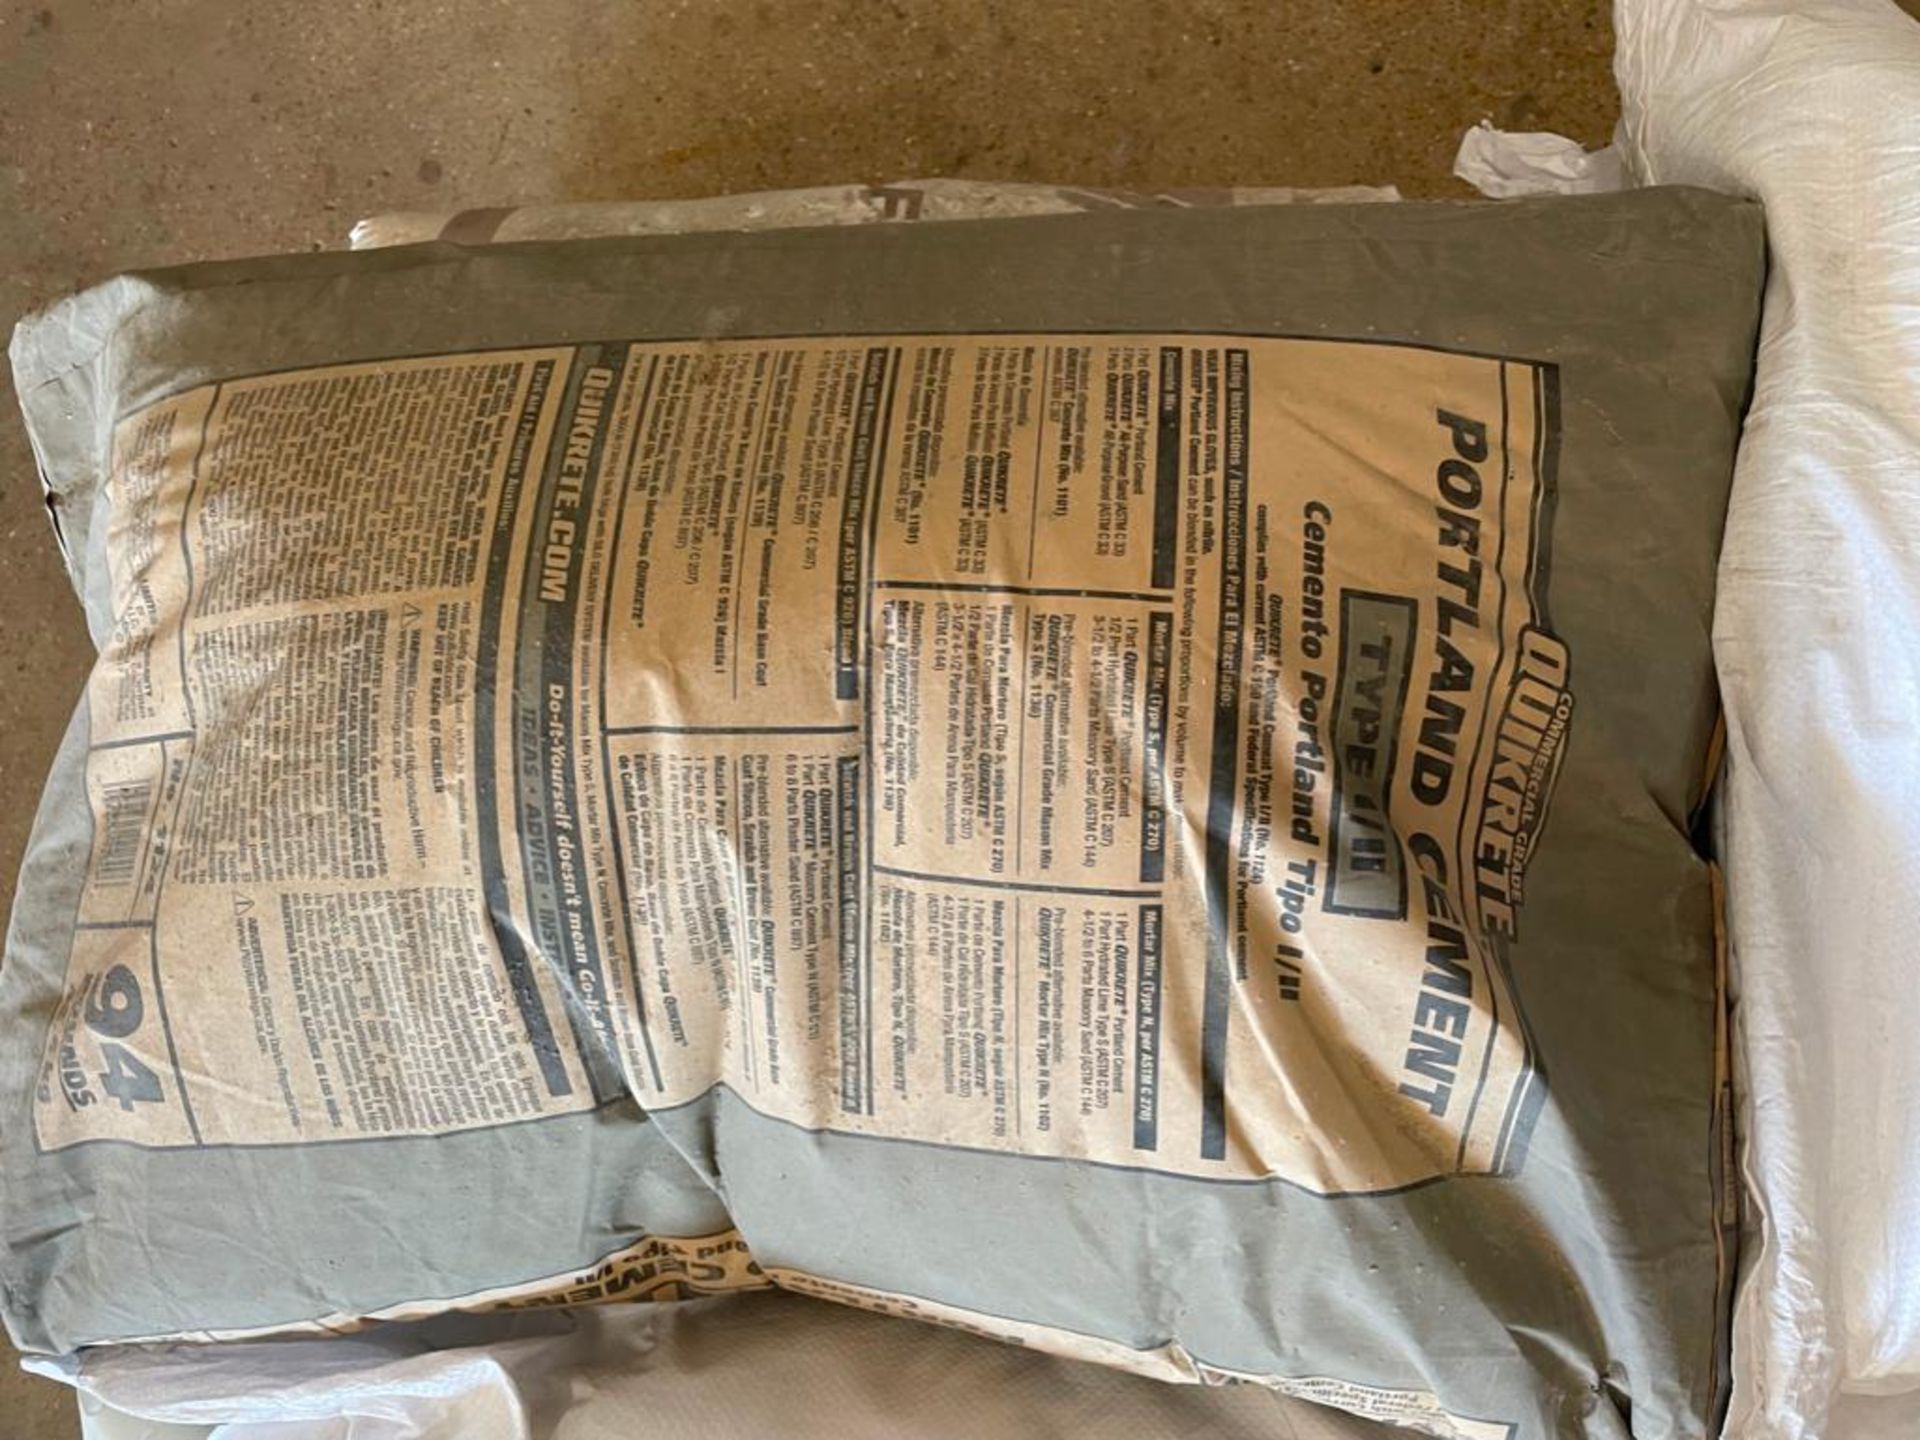 Pallet of Fine Sand & Portland Cement 1/11. Located in Hazelwood, MO - Image 6 of 6